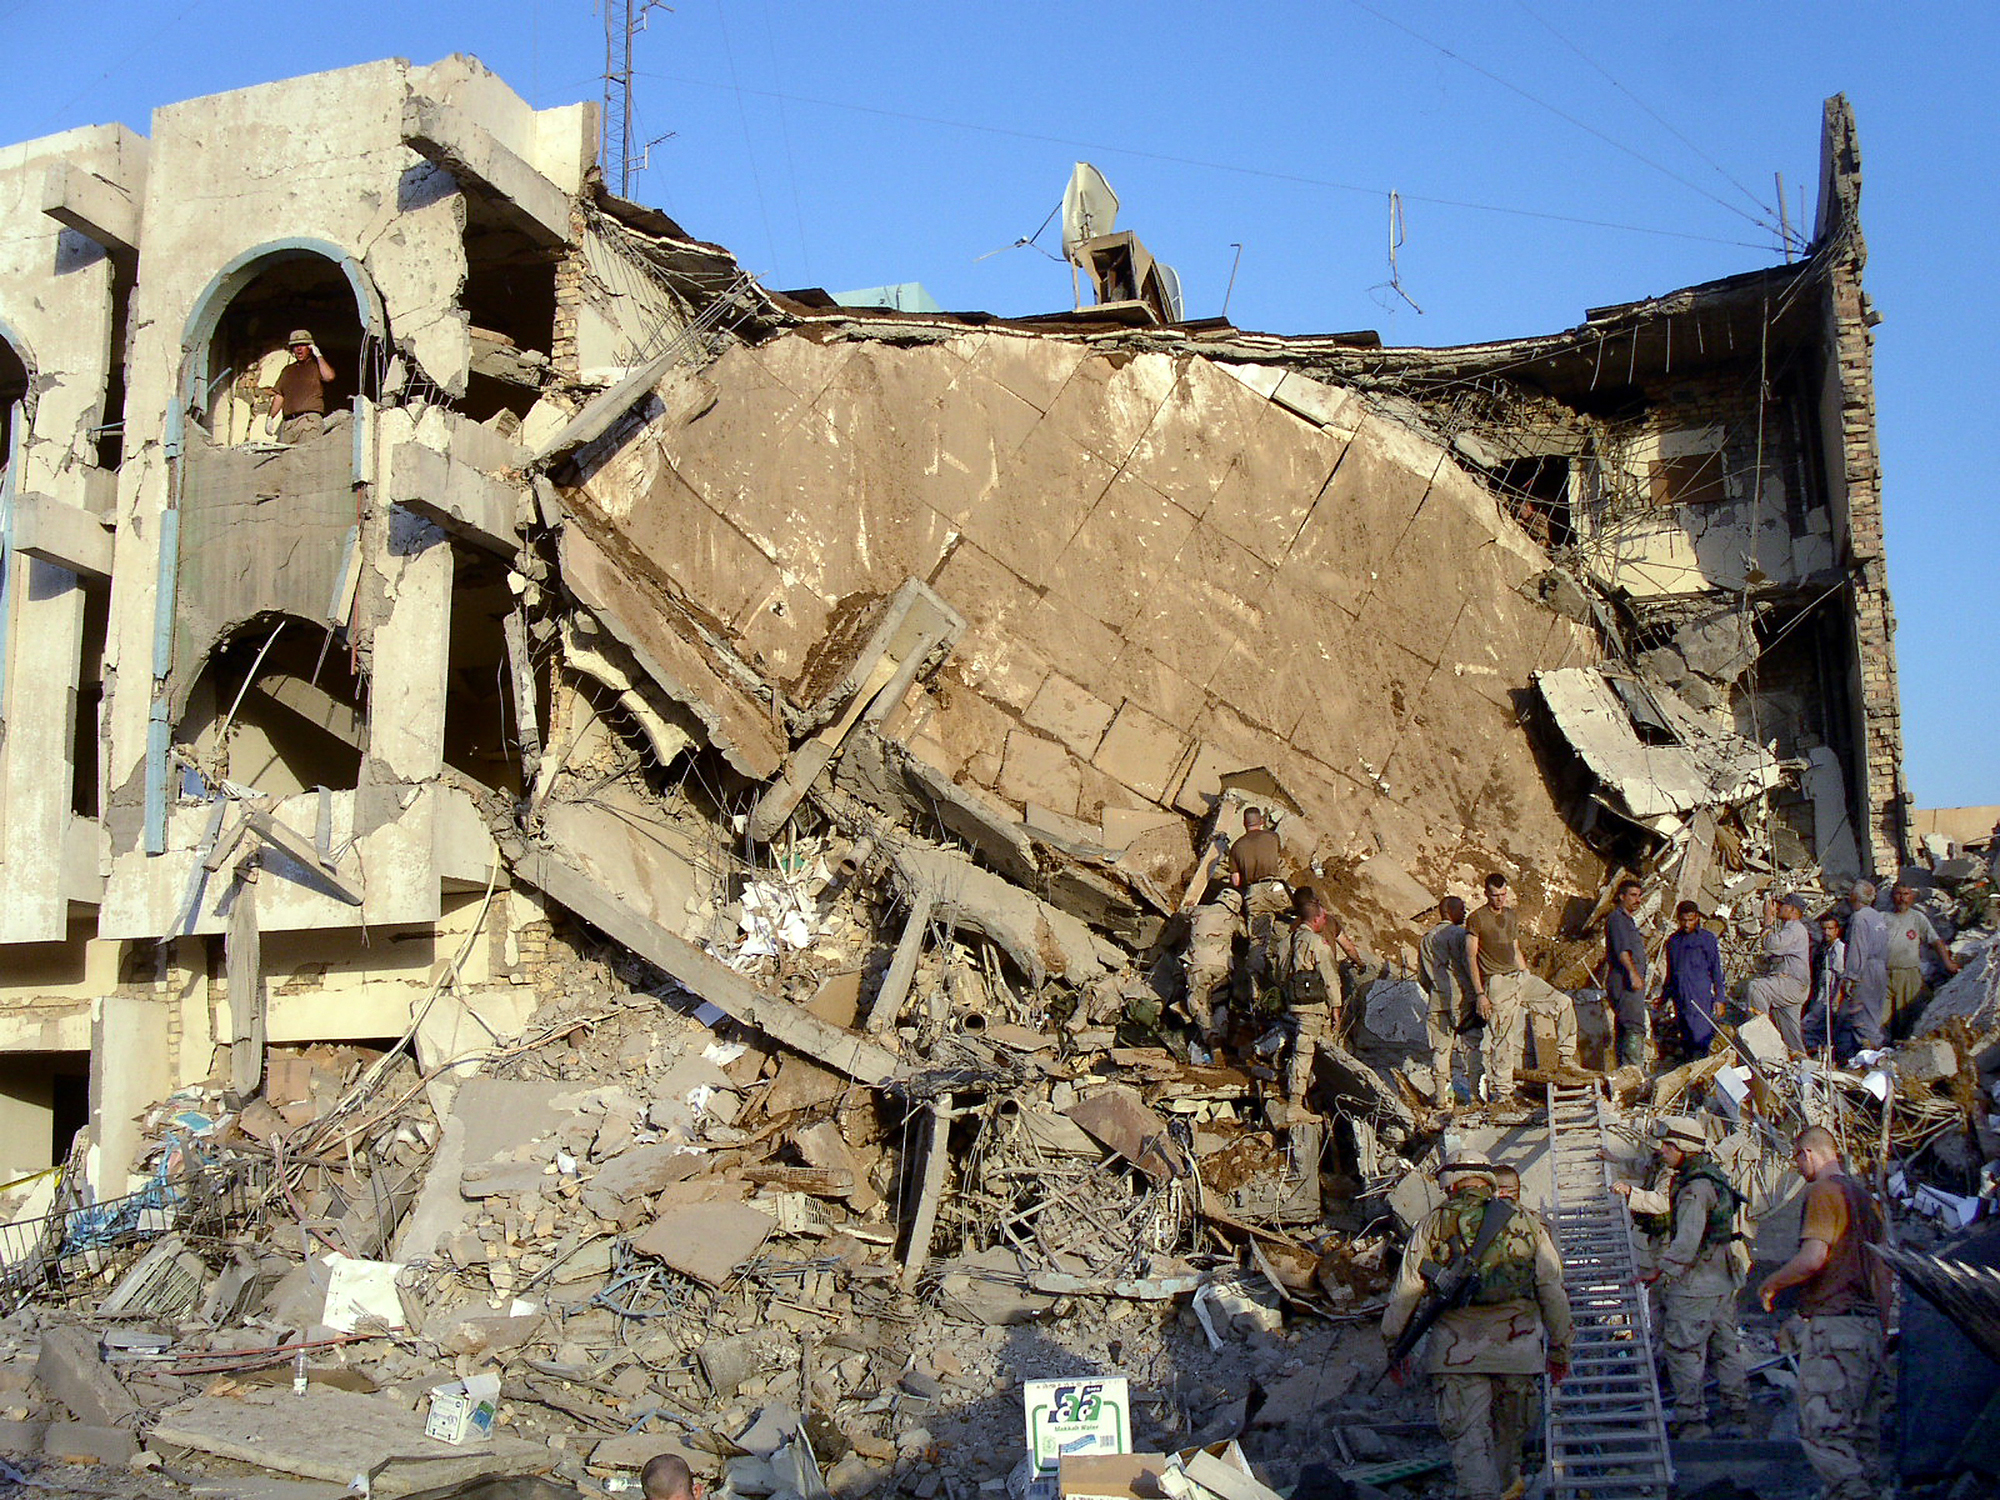 Workers and soldiers search through the rubble of United Nations headquarters, Baghdad, after the explosion